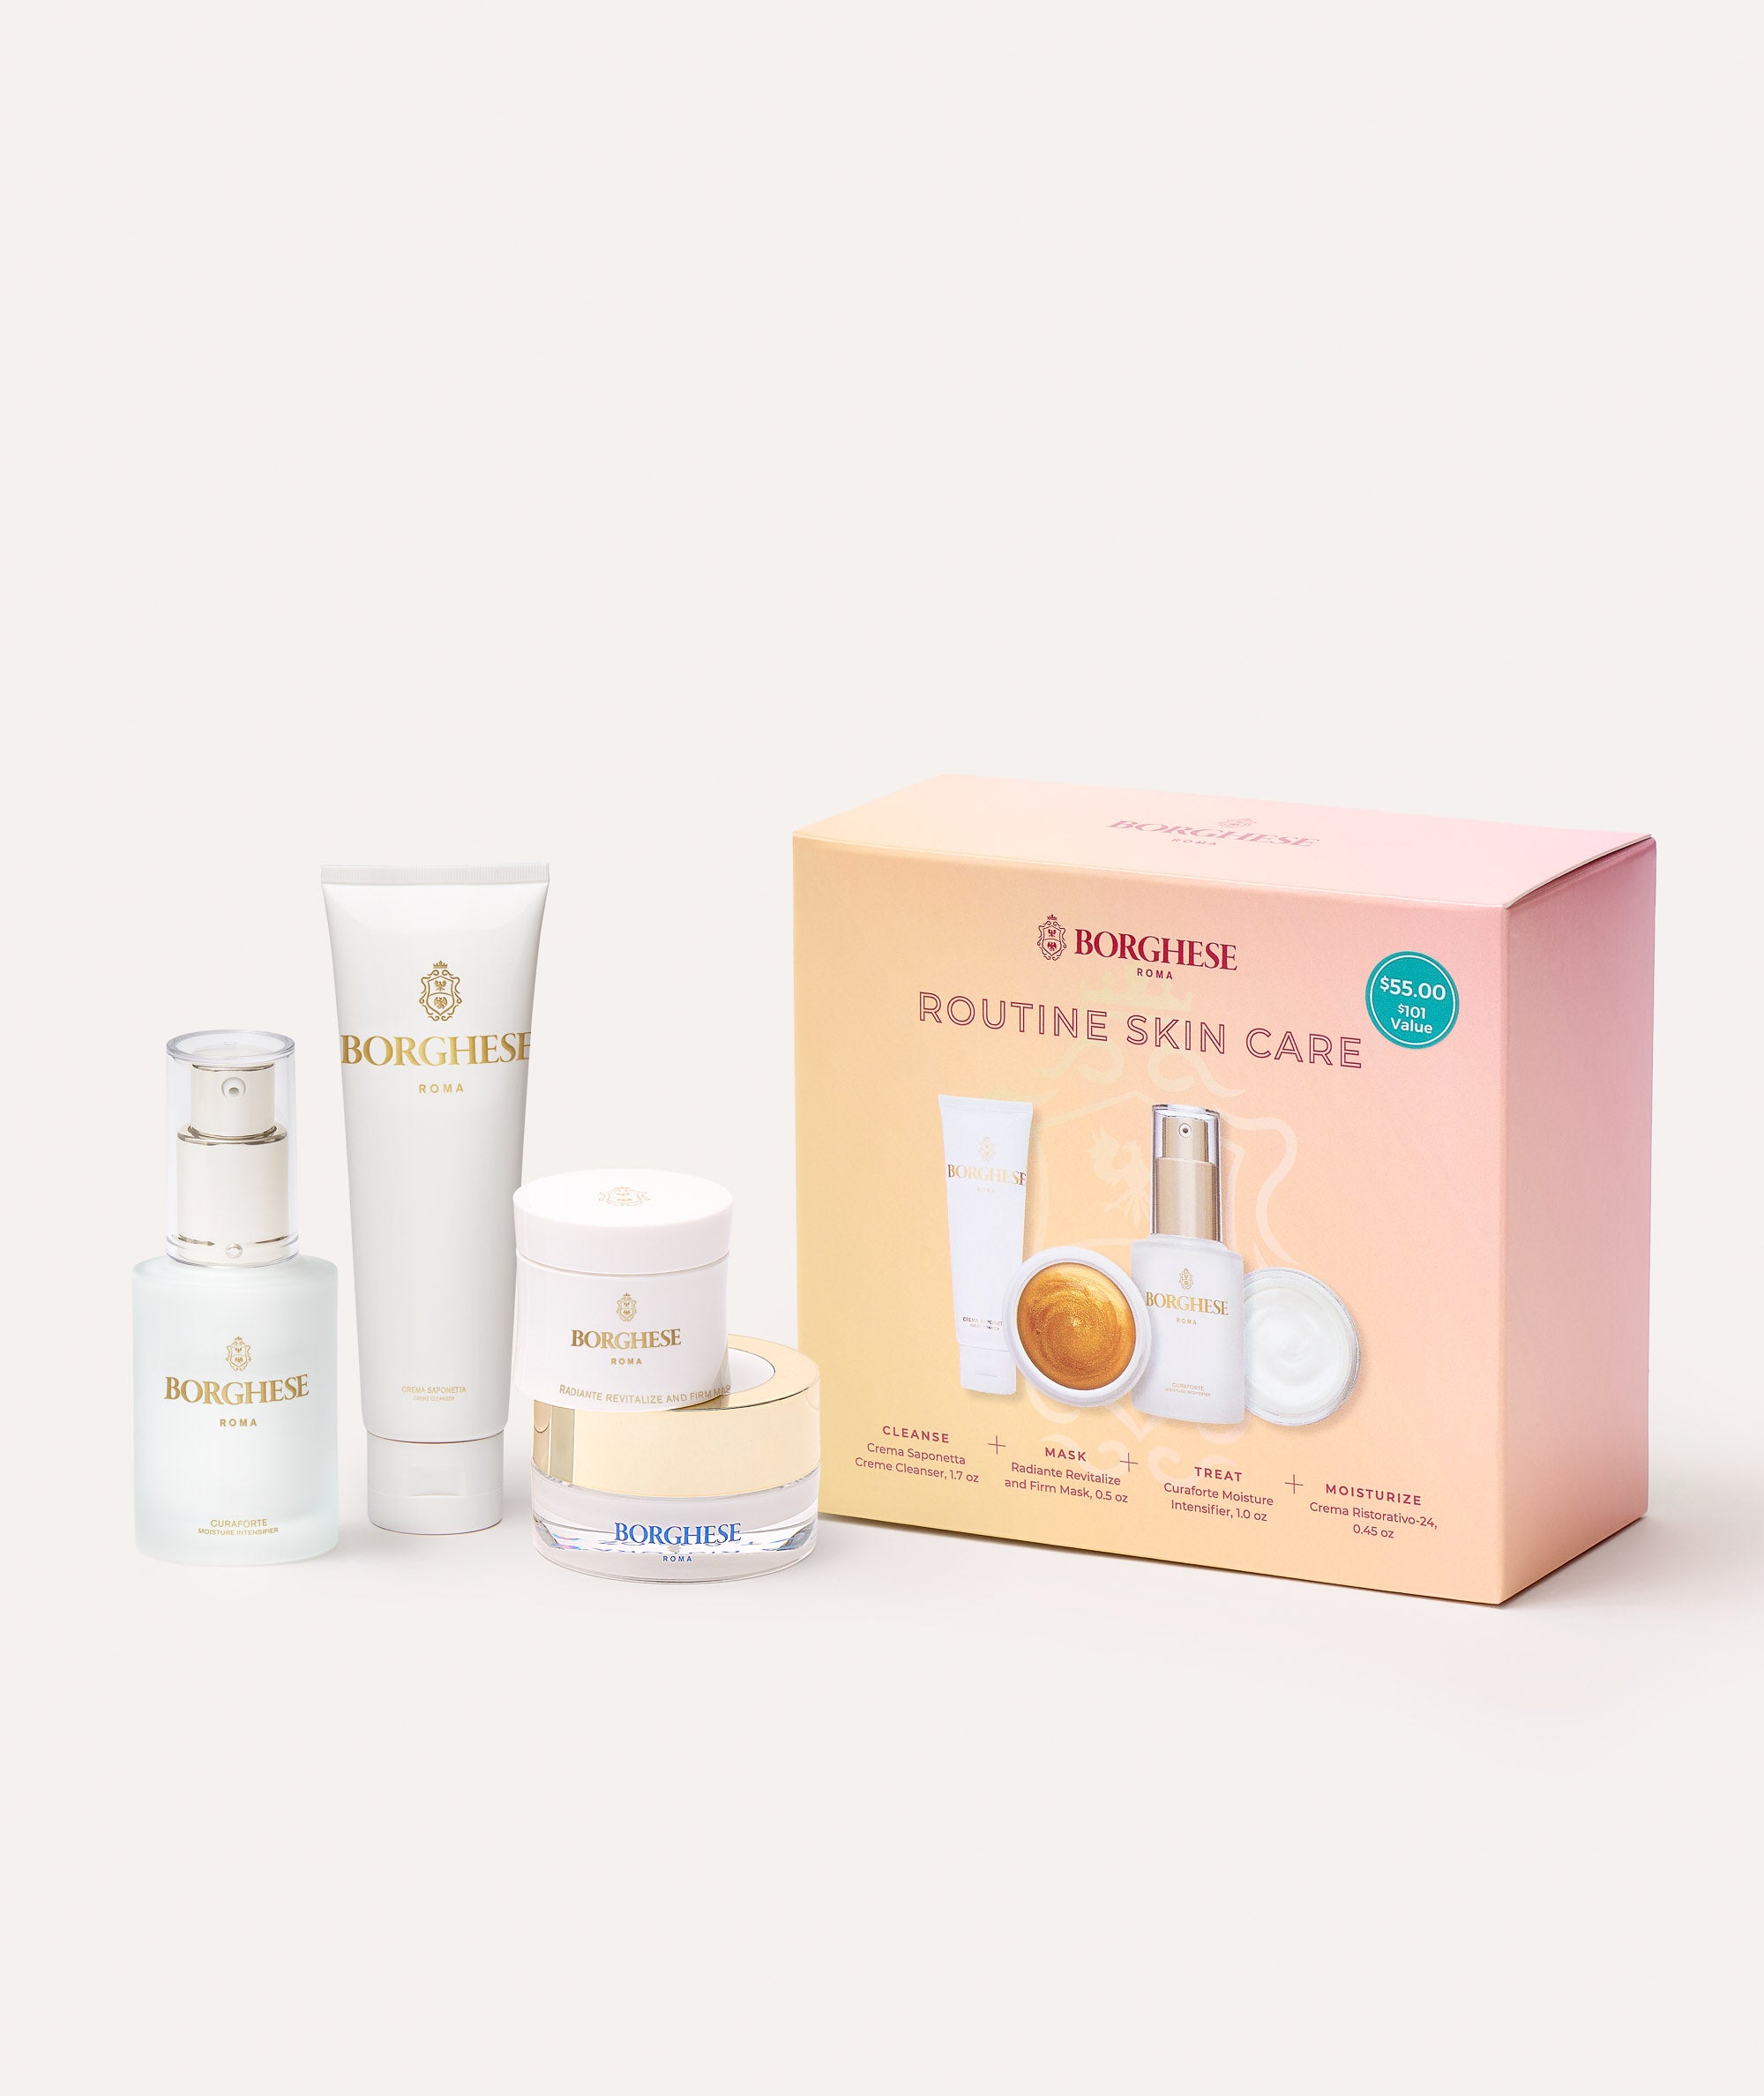 This is a picture of the contents and box for the Borghese 4-Piece Routine Skincare Gift Set